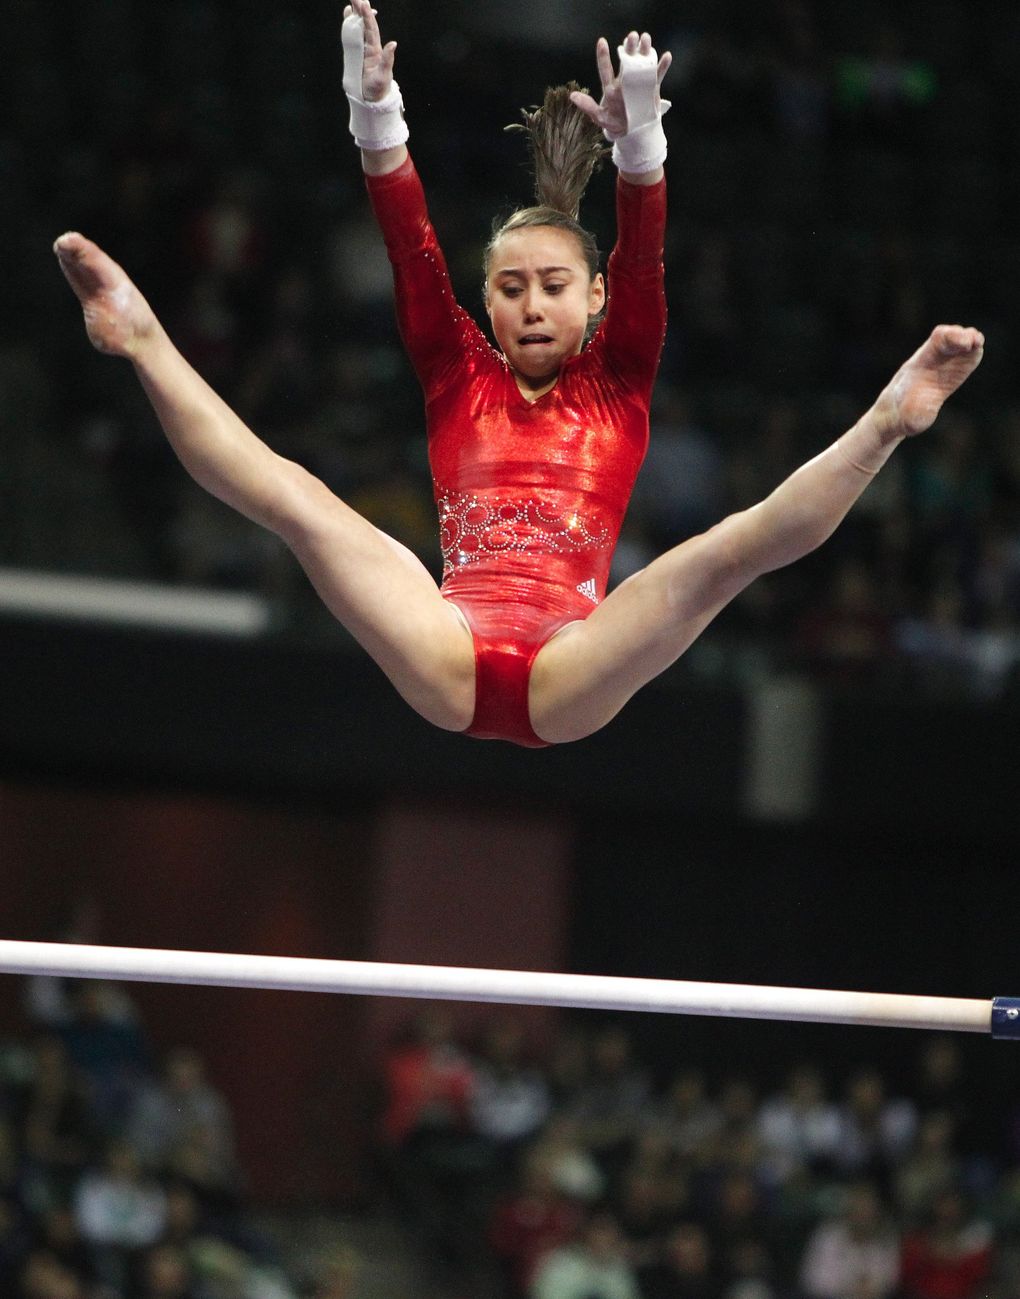 USA’s Katelyn Ohashi soars over the top bar during her routine on the un-ev...